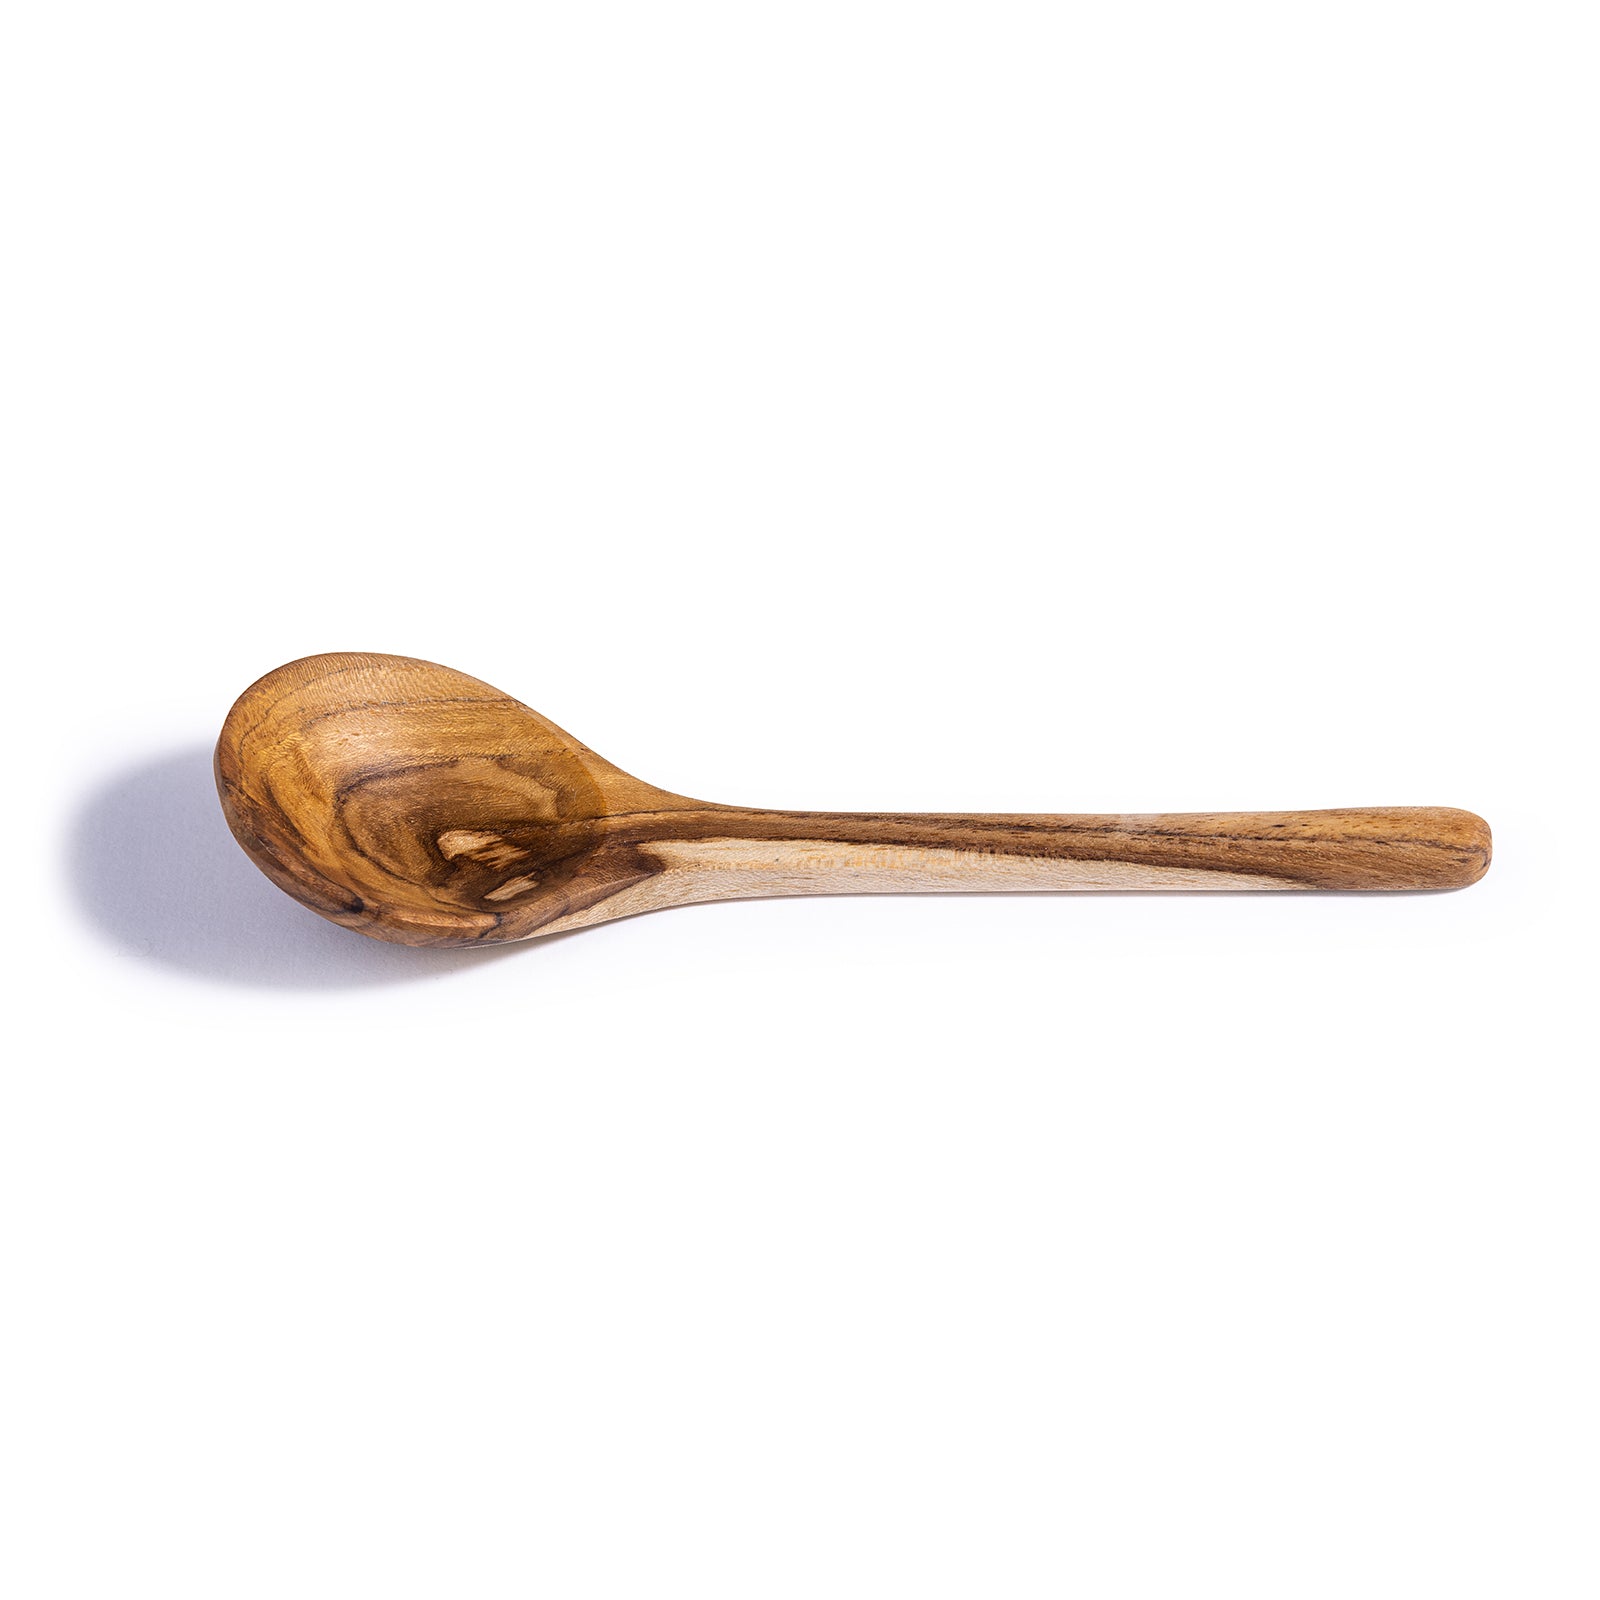 Upcycled Eco Friendly Wooden Spoon